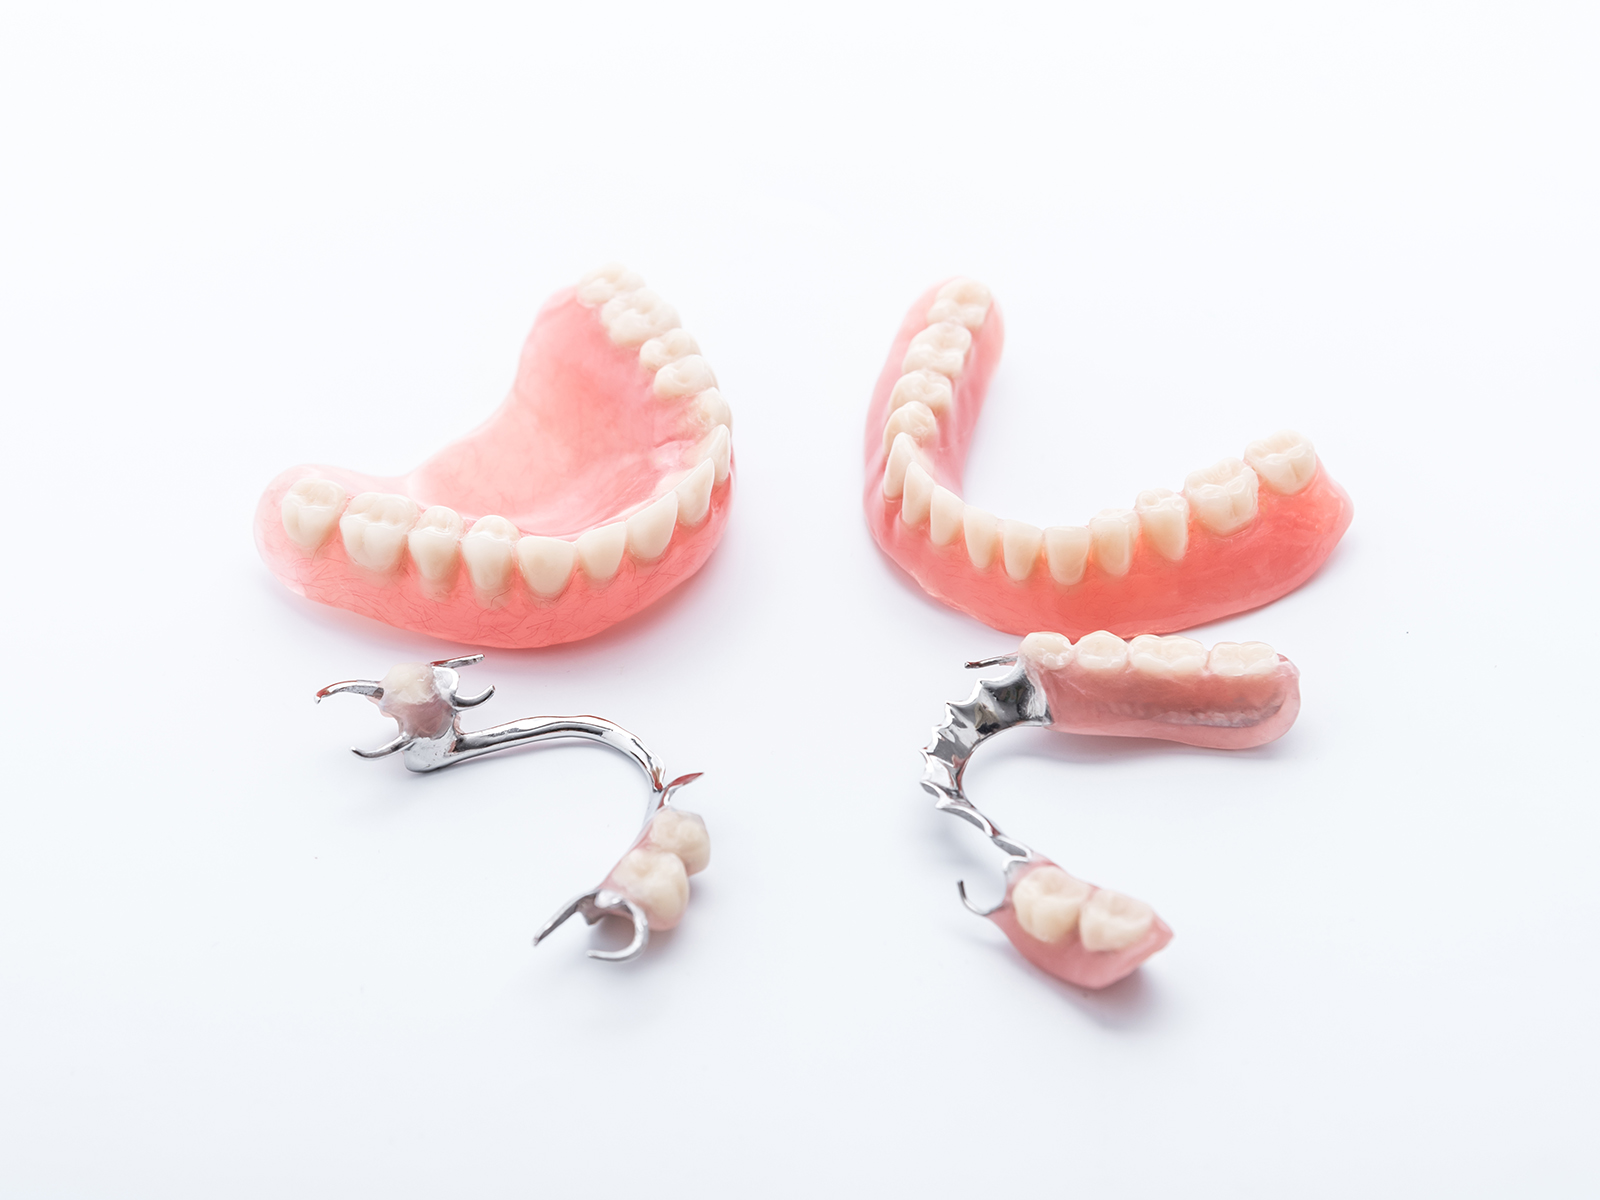 Does Your Face Change After Dentures?